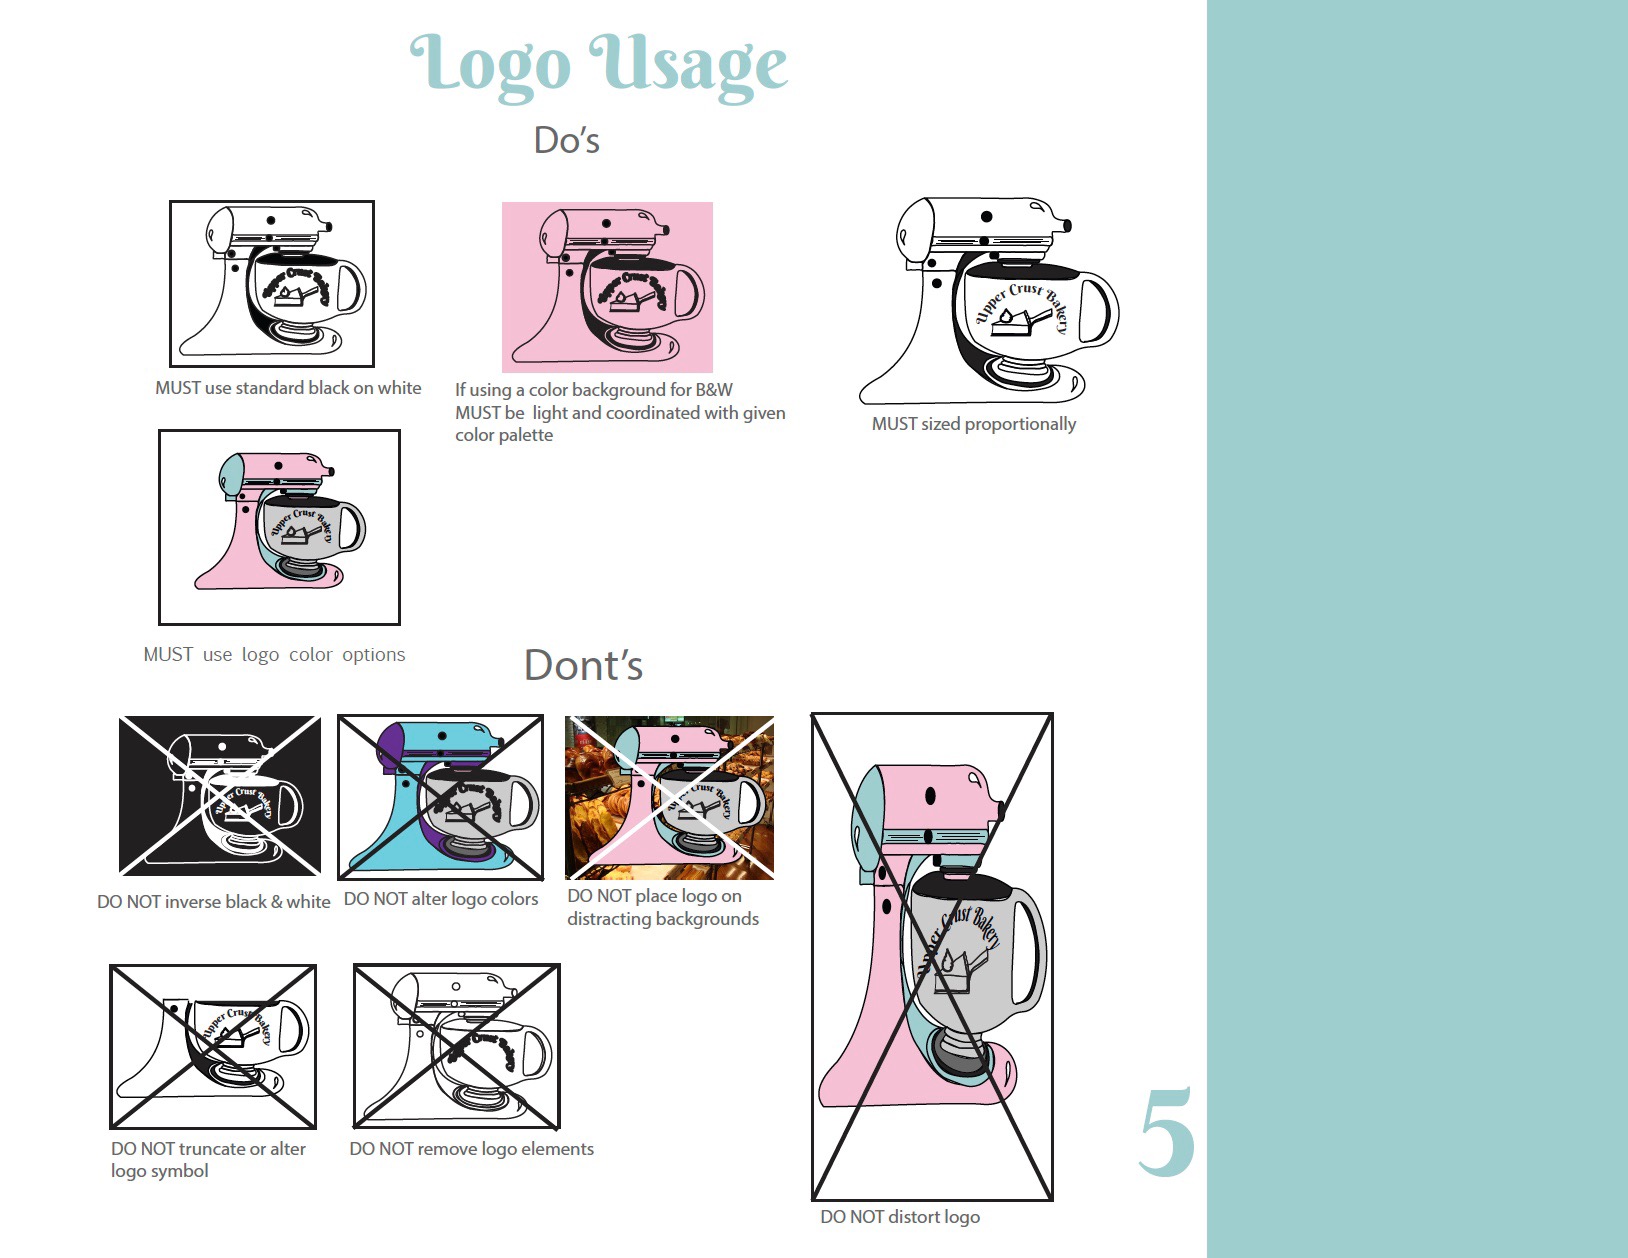 An image of do's and dont's for the logo usage